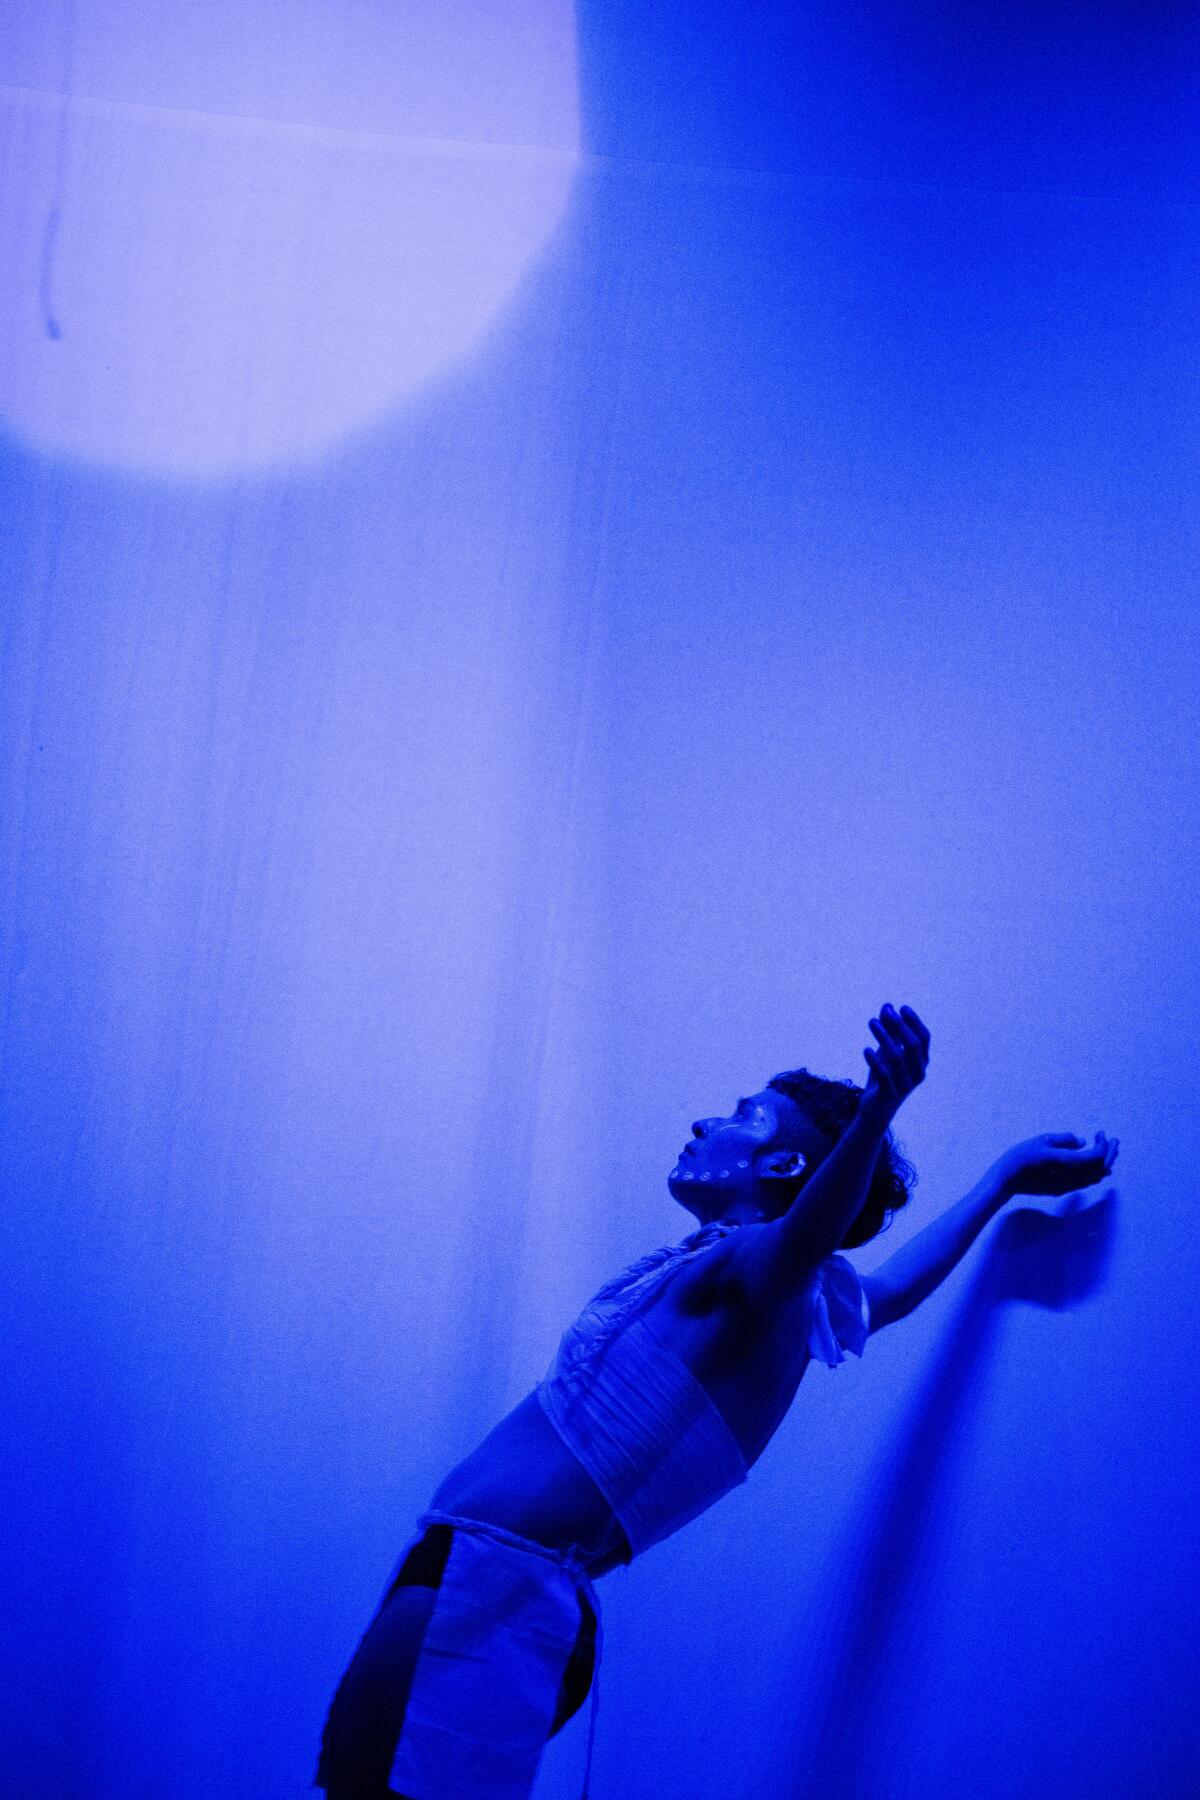 A blue-tinted image shows a dancer, with arms extended toward upward.